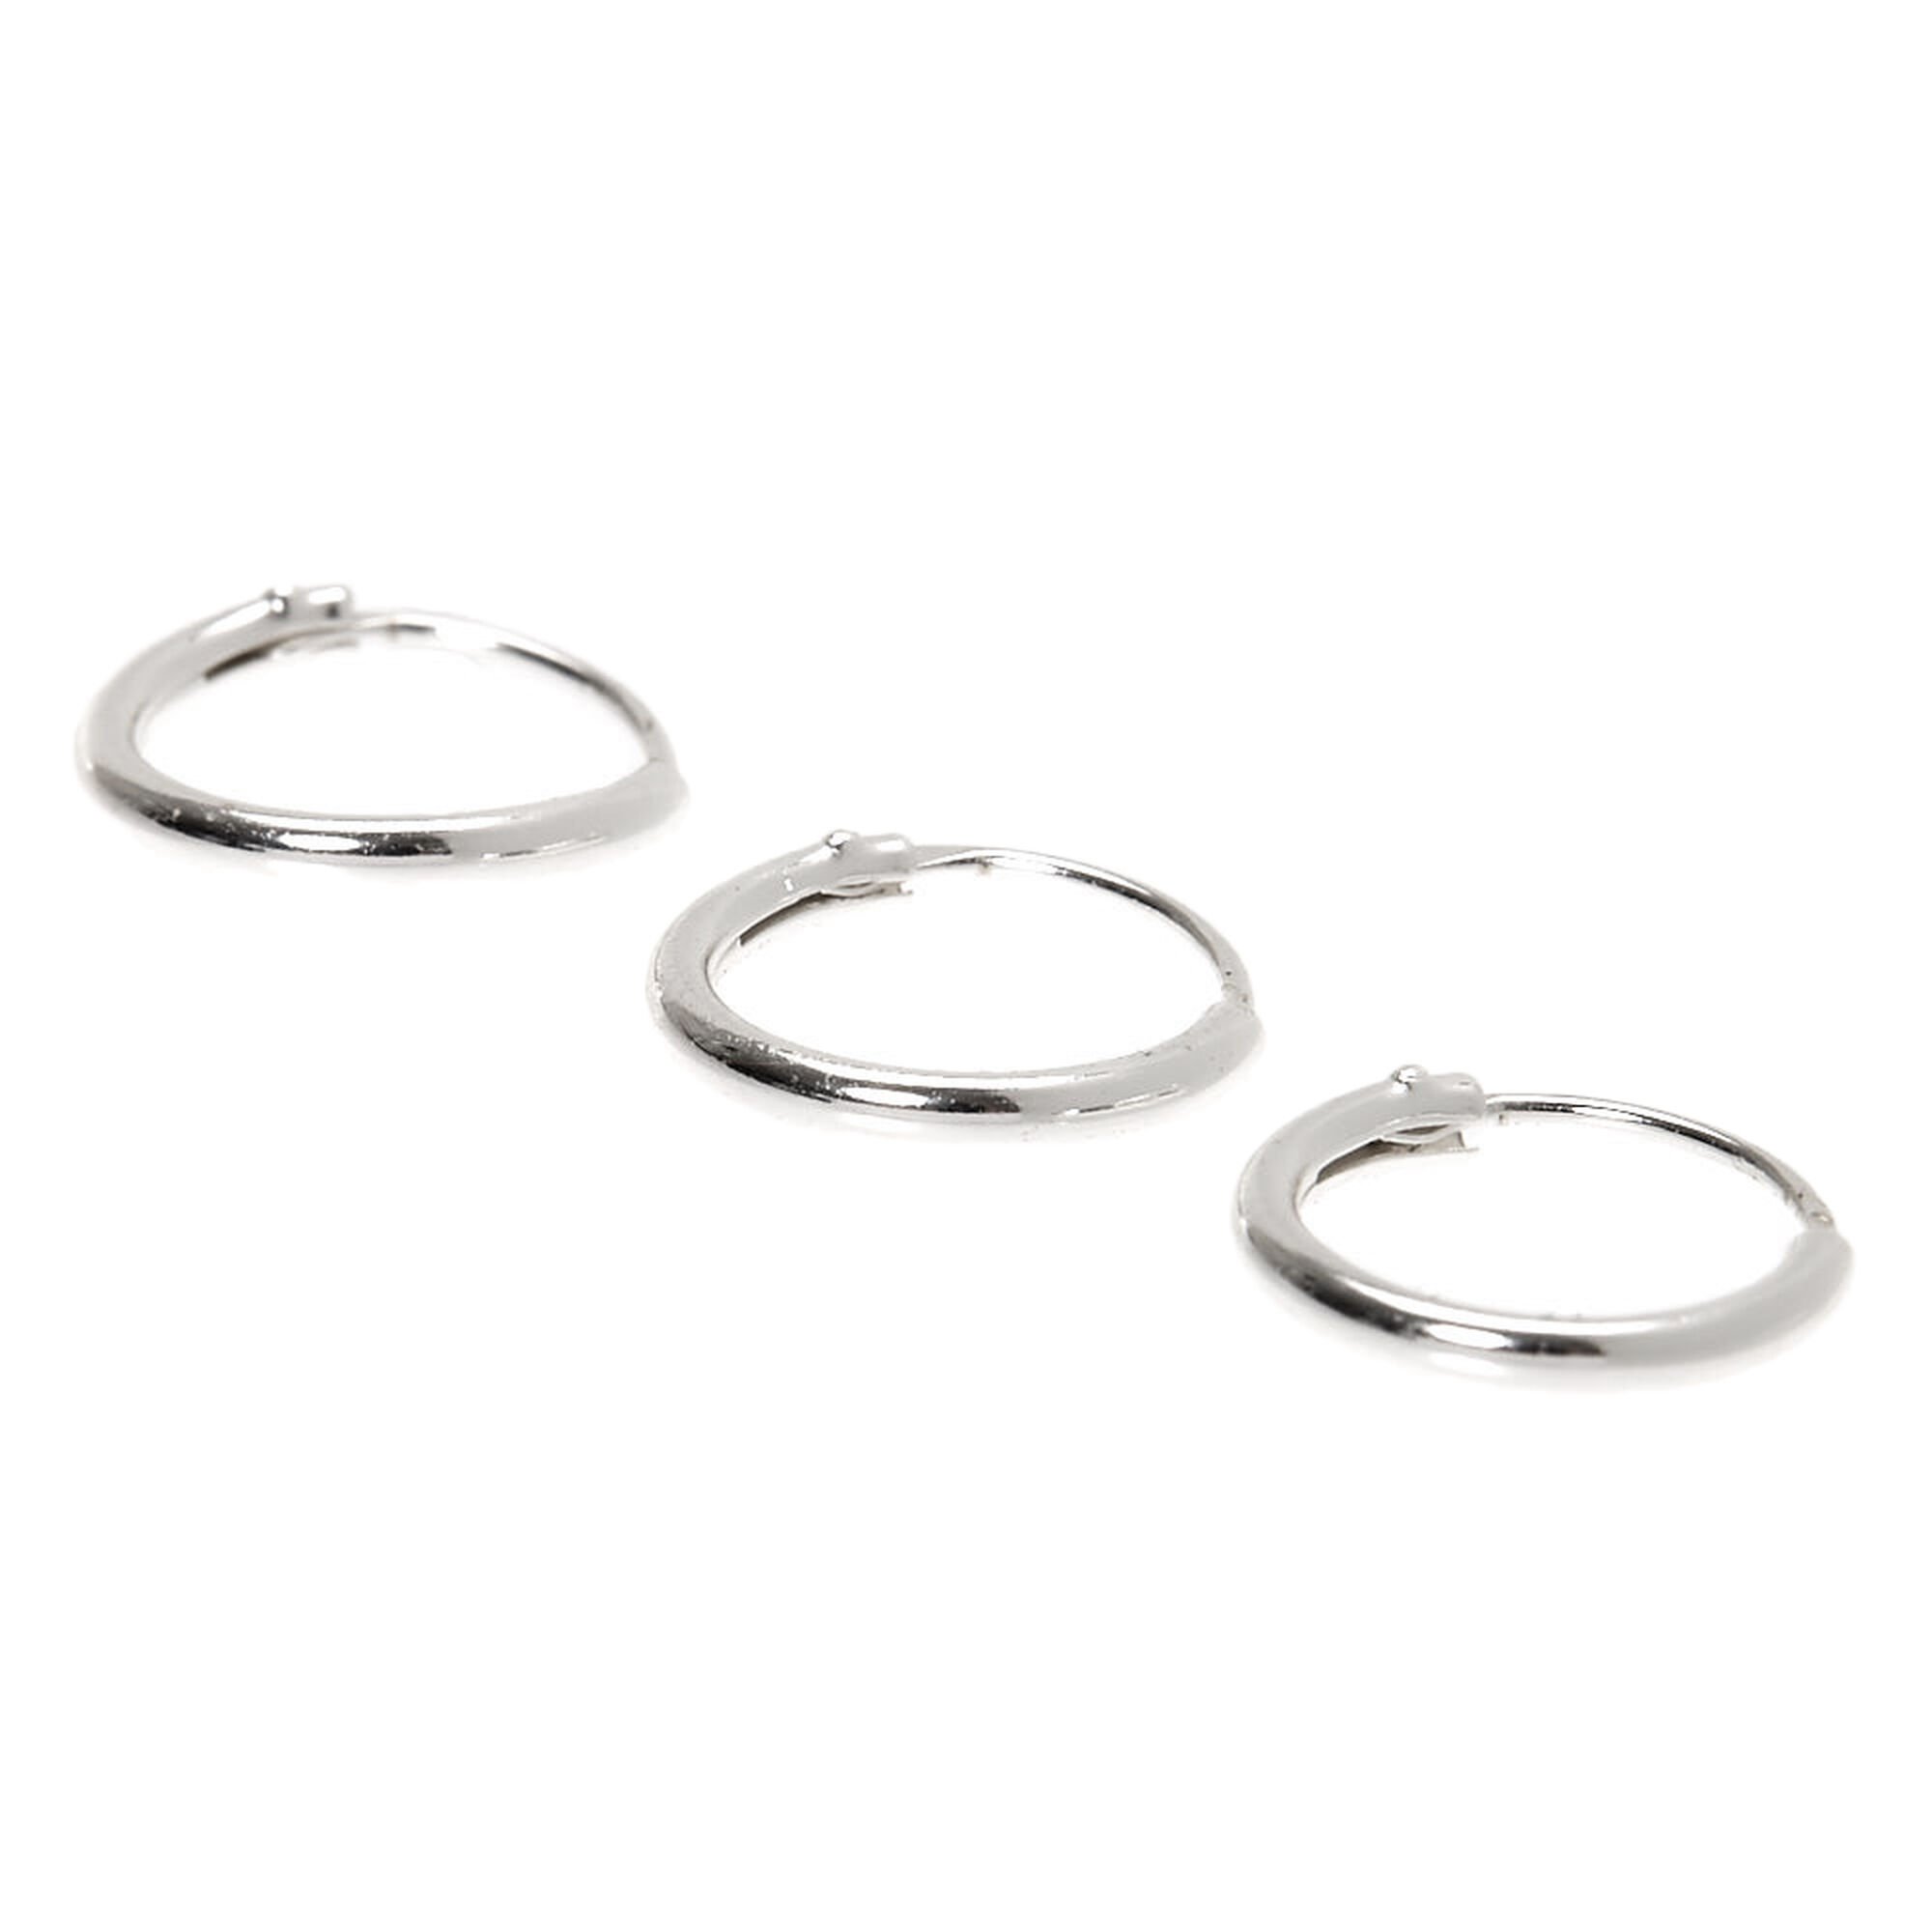 View Claires 22G Cartilage Snap Hoop Earrings 3 Pack Silver information